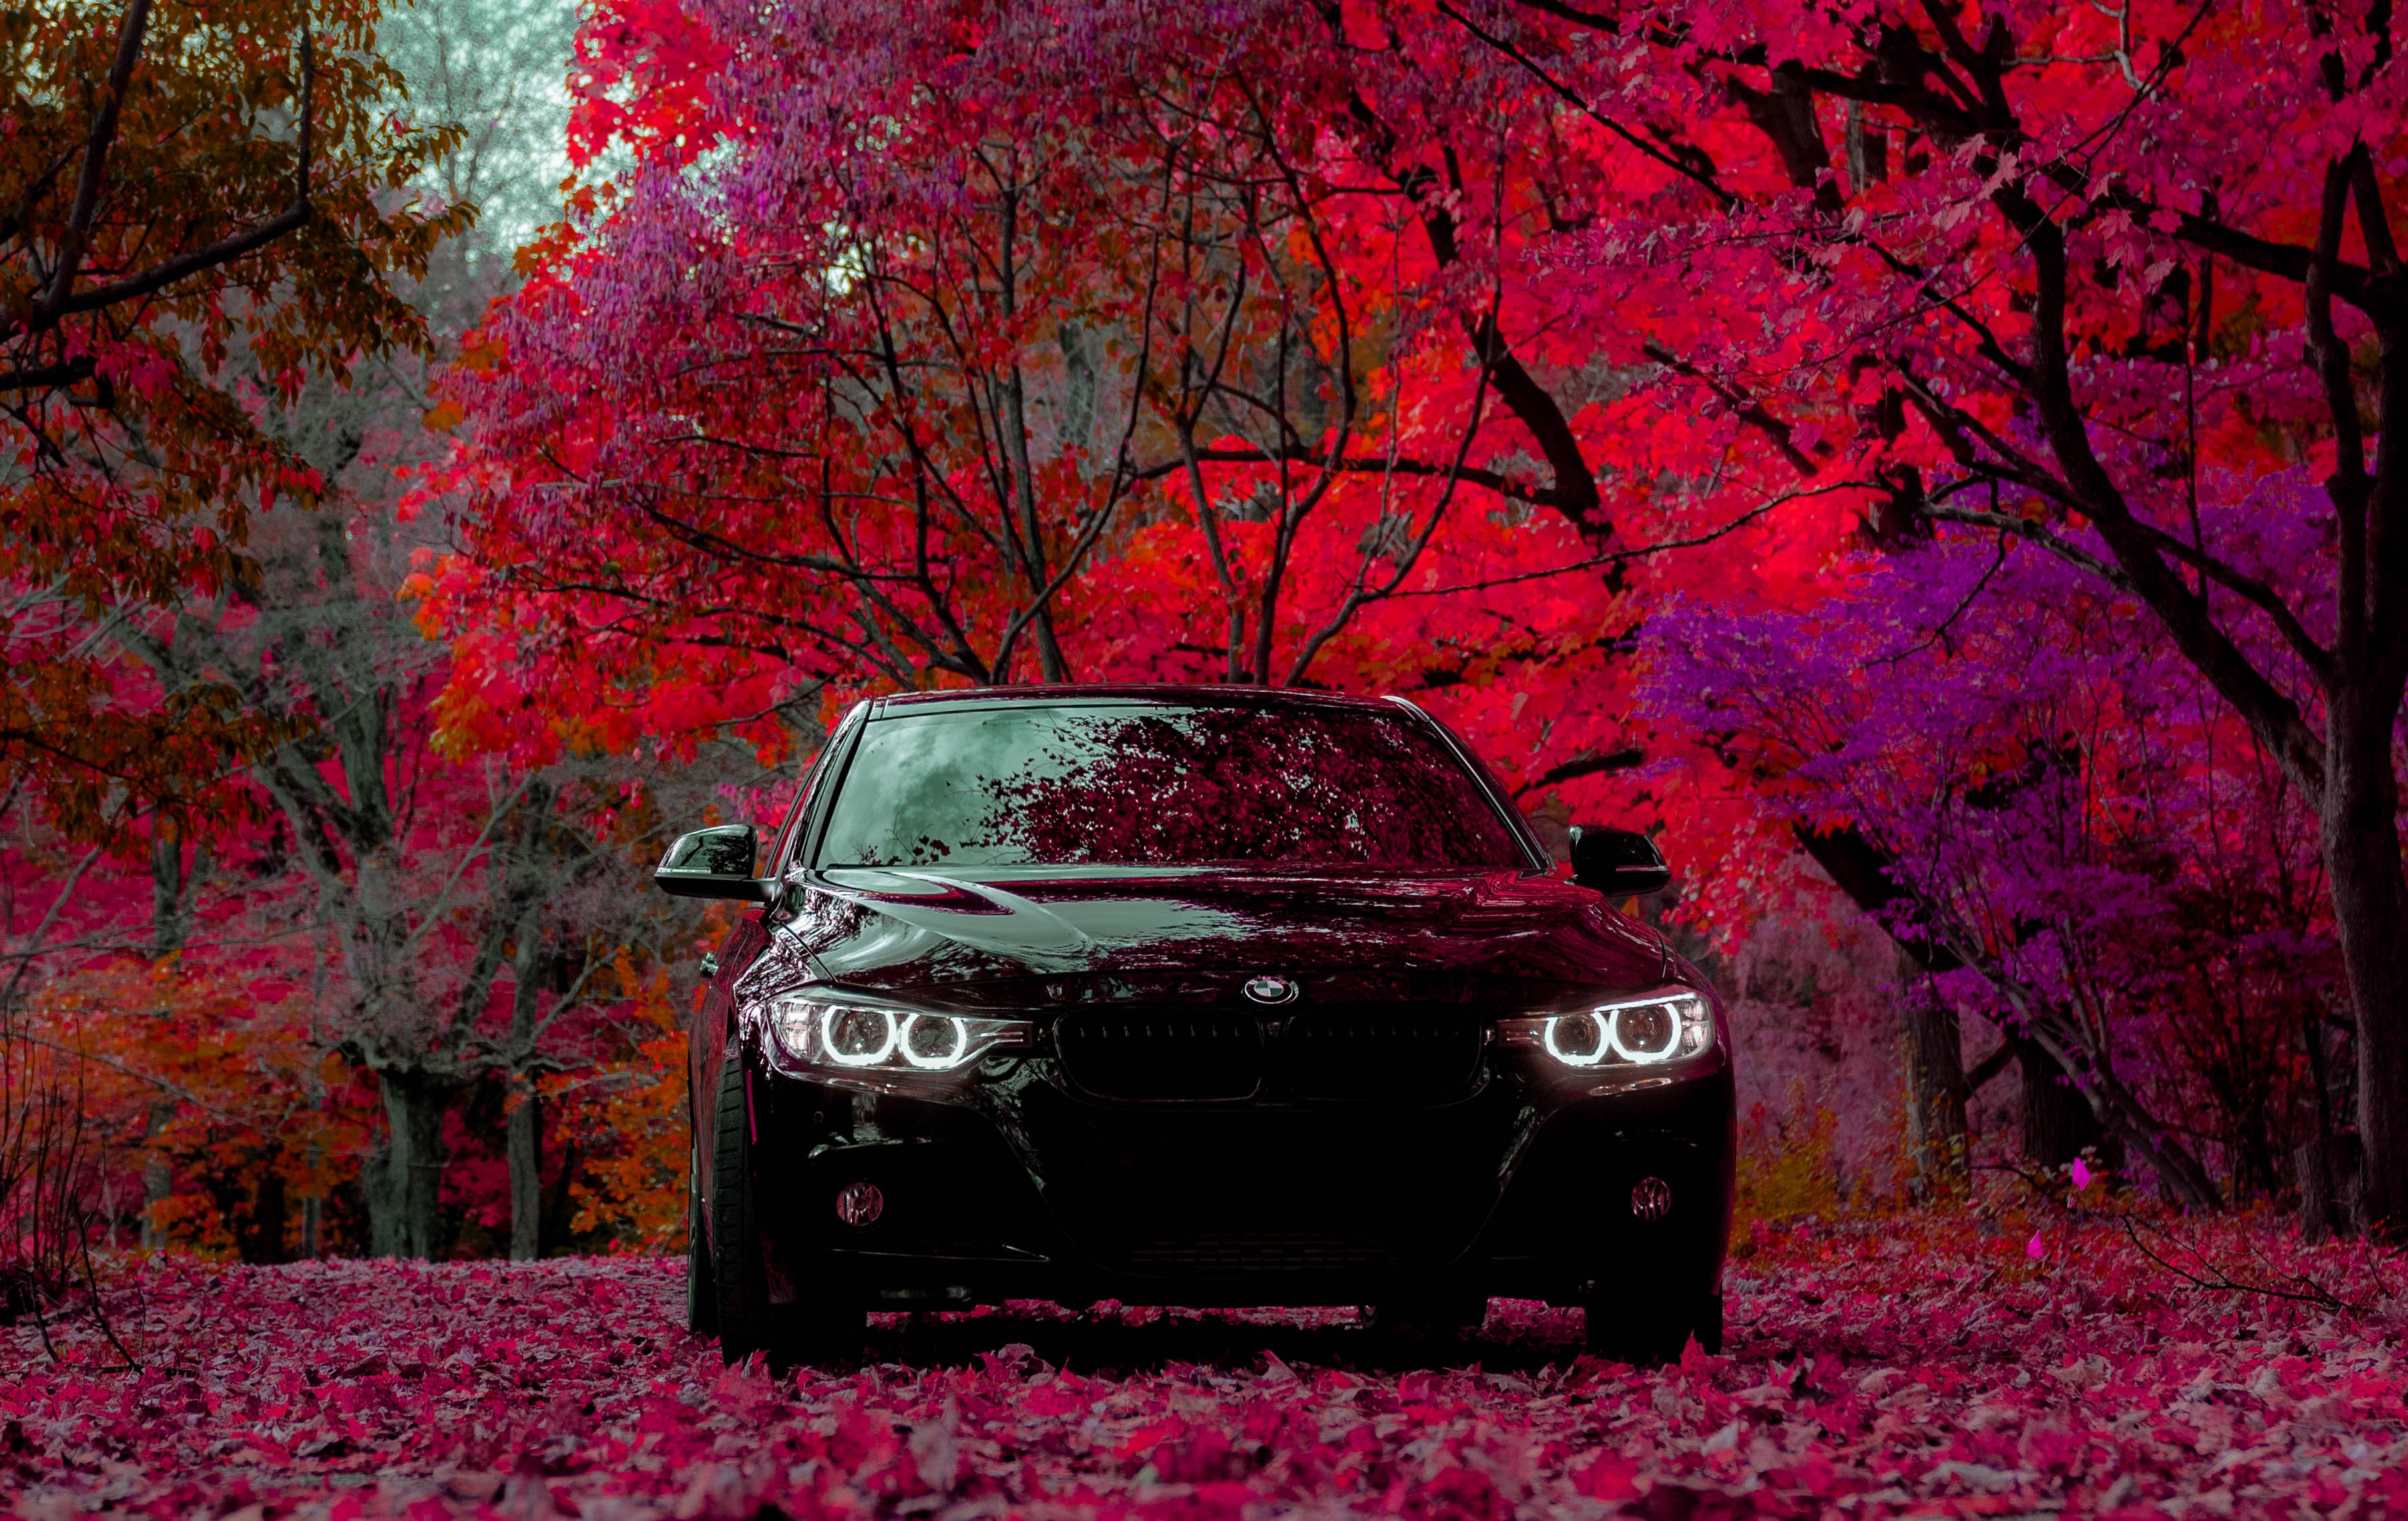 bmw, cars, black, forest, car, front view, machine, bmw f30 335i phone wallpaper